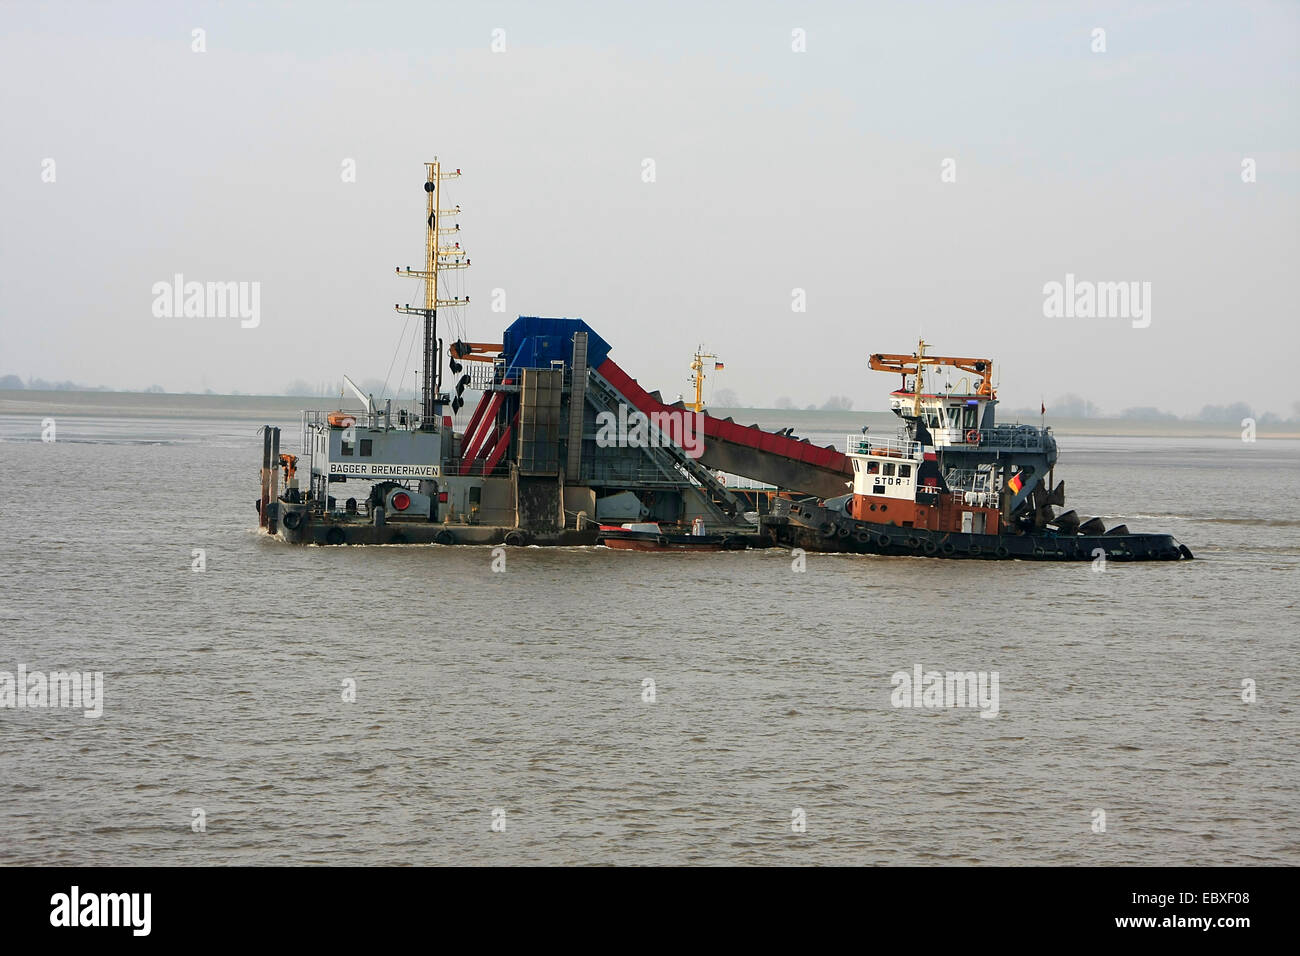 A dredger, also called dredgers, is a specialized vessel which has a technical equipment for dredging of navigation channels, harbors, estuaries, bays or the like. Photo: Klaus Nowottnick Date: March 7, 2014 Stock Photo